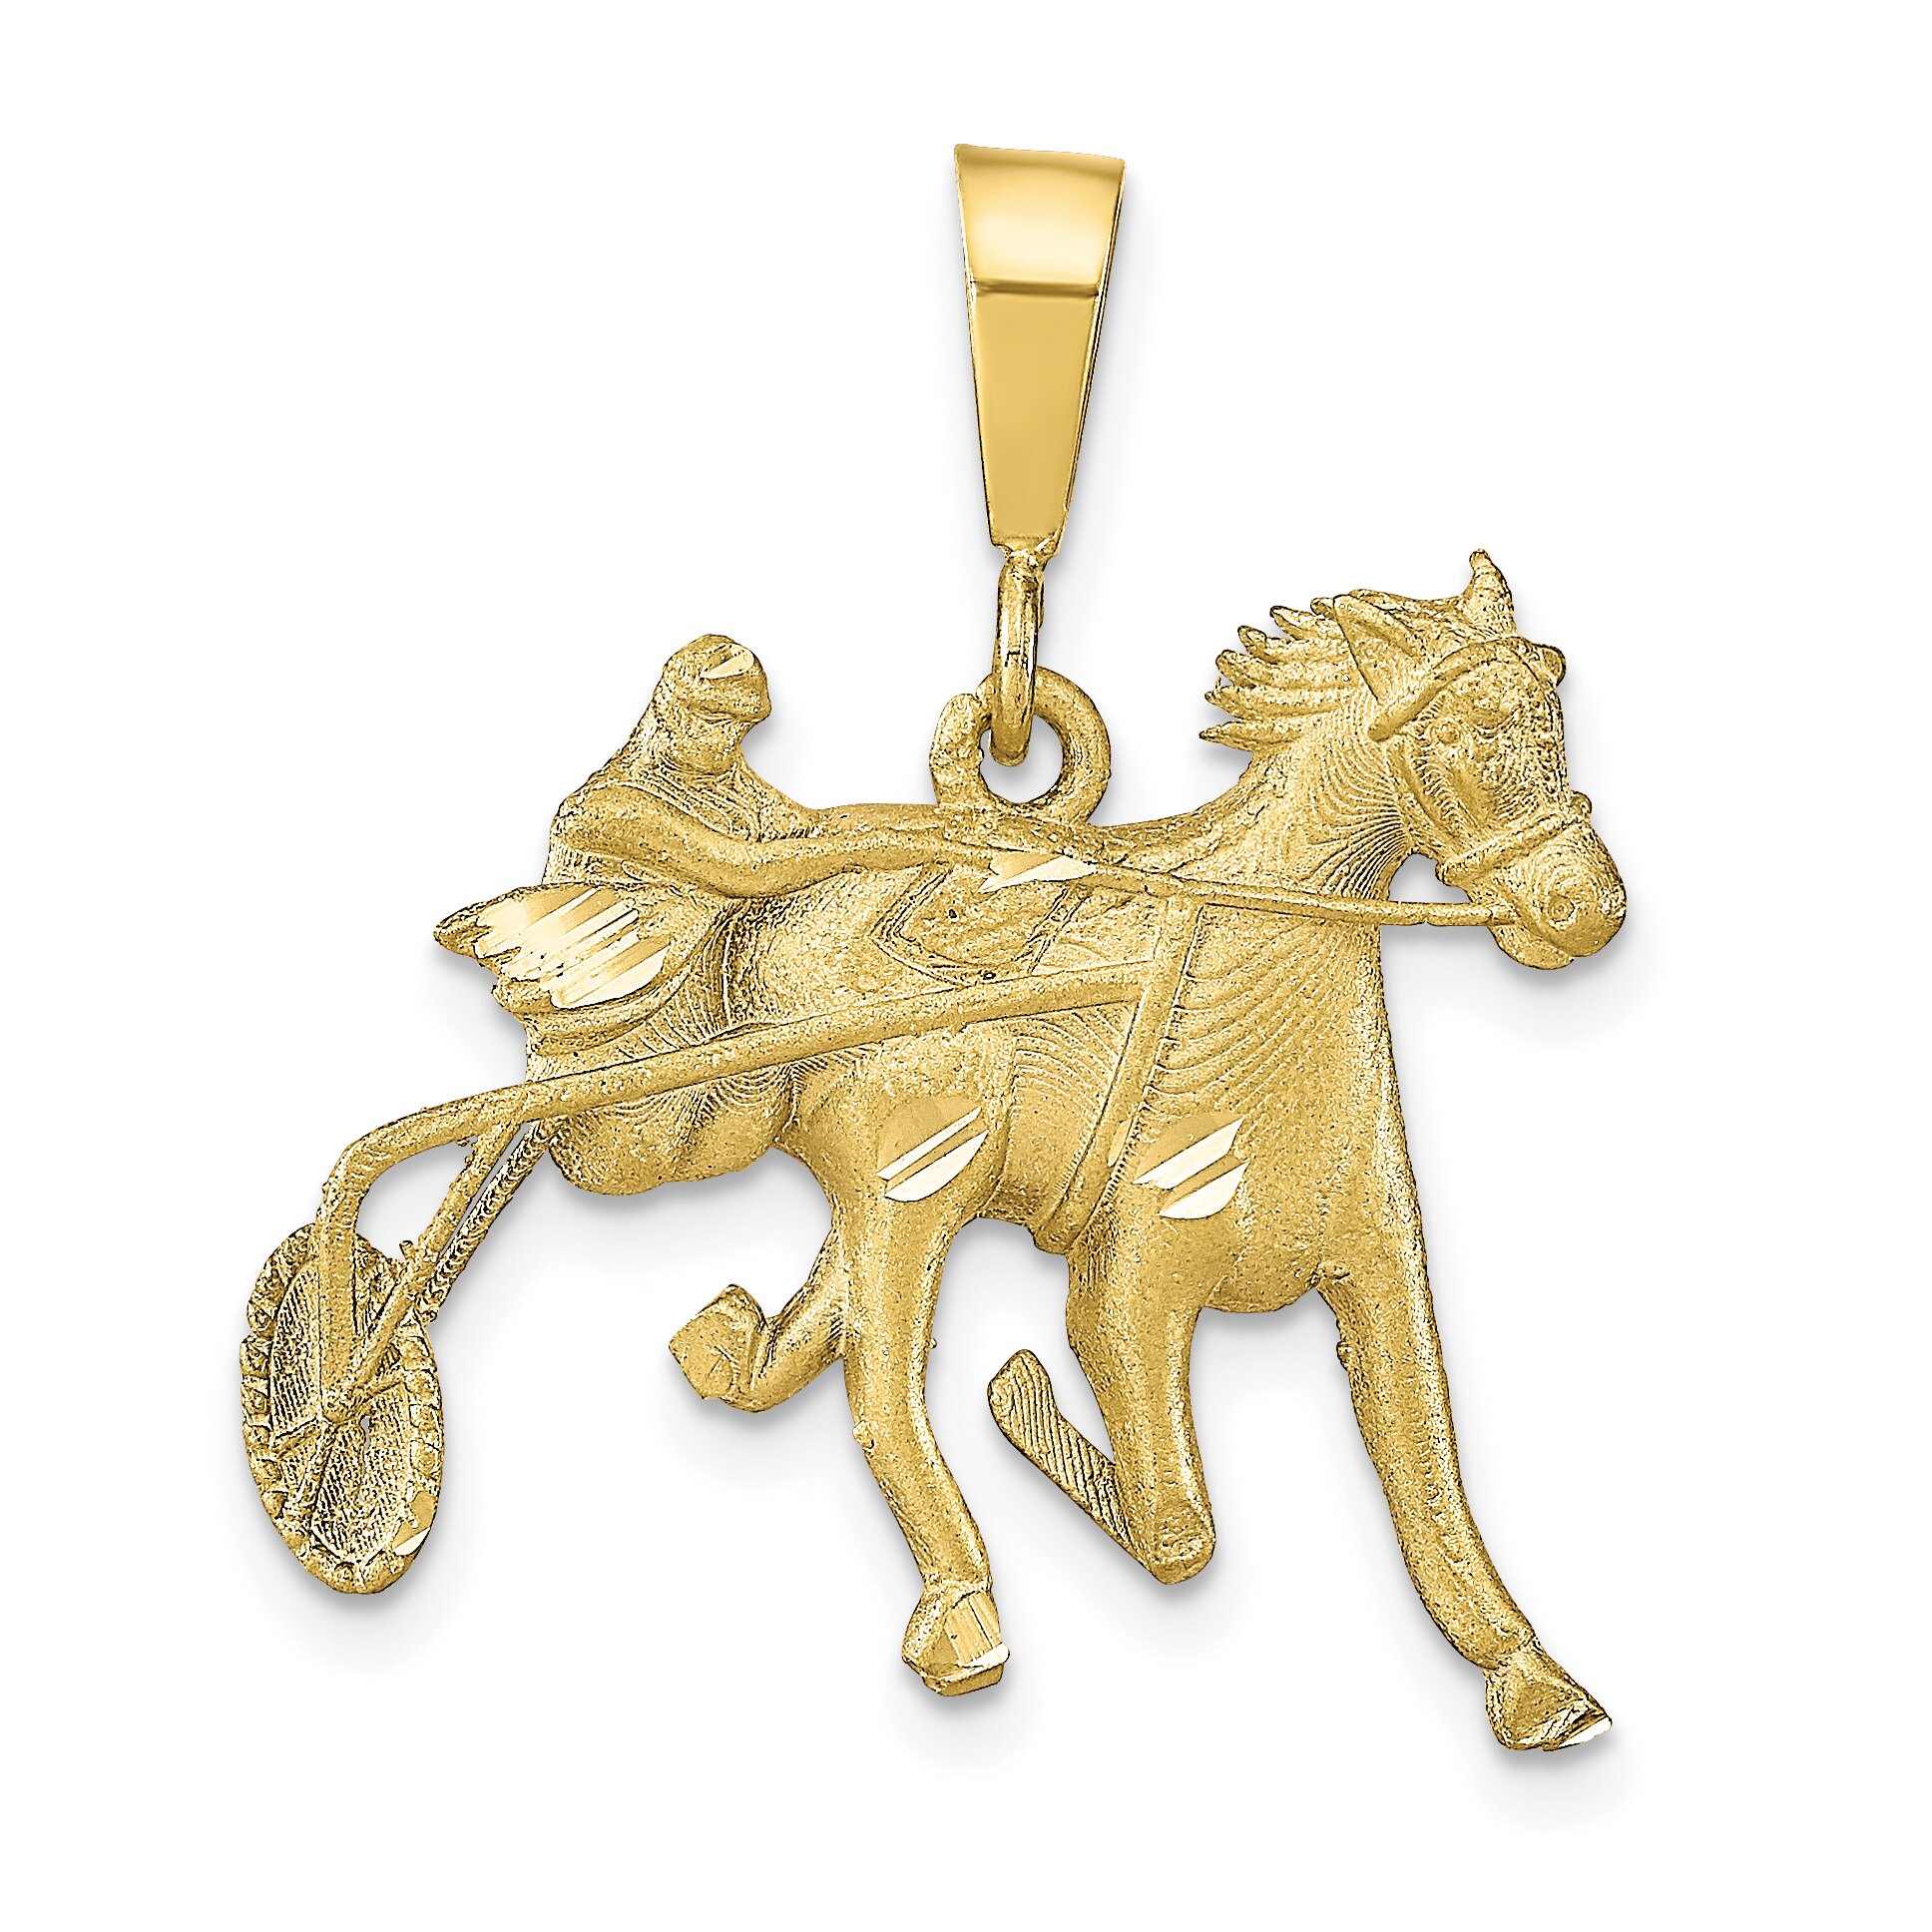 Findingking 10K Yellow Gold Sulky Horse Racing Charm